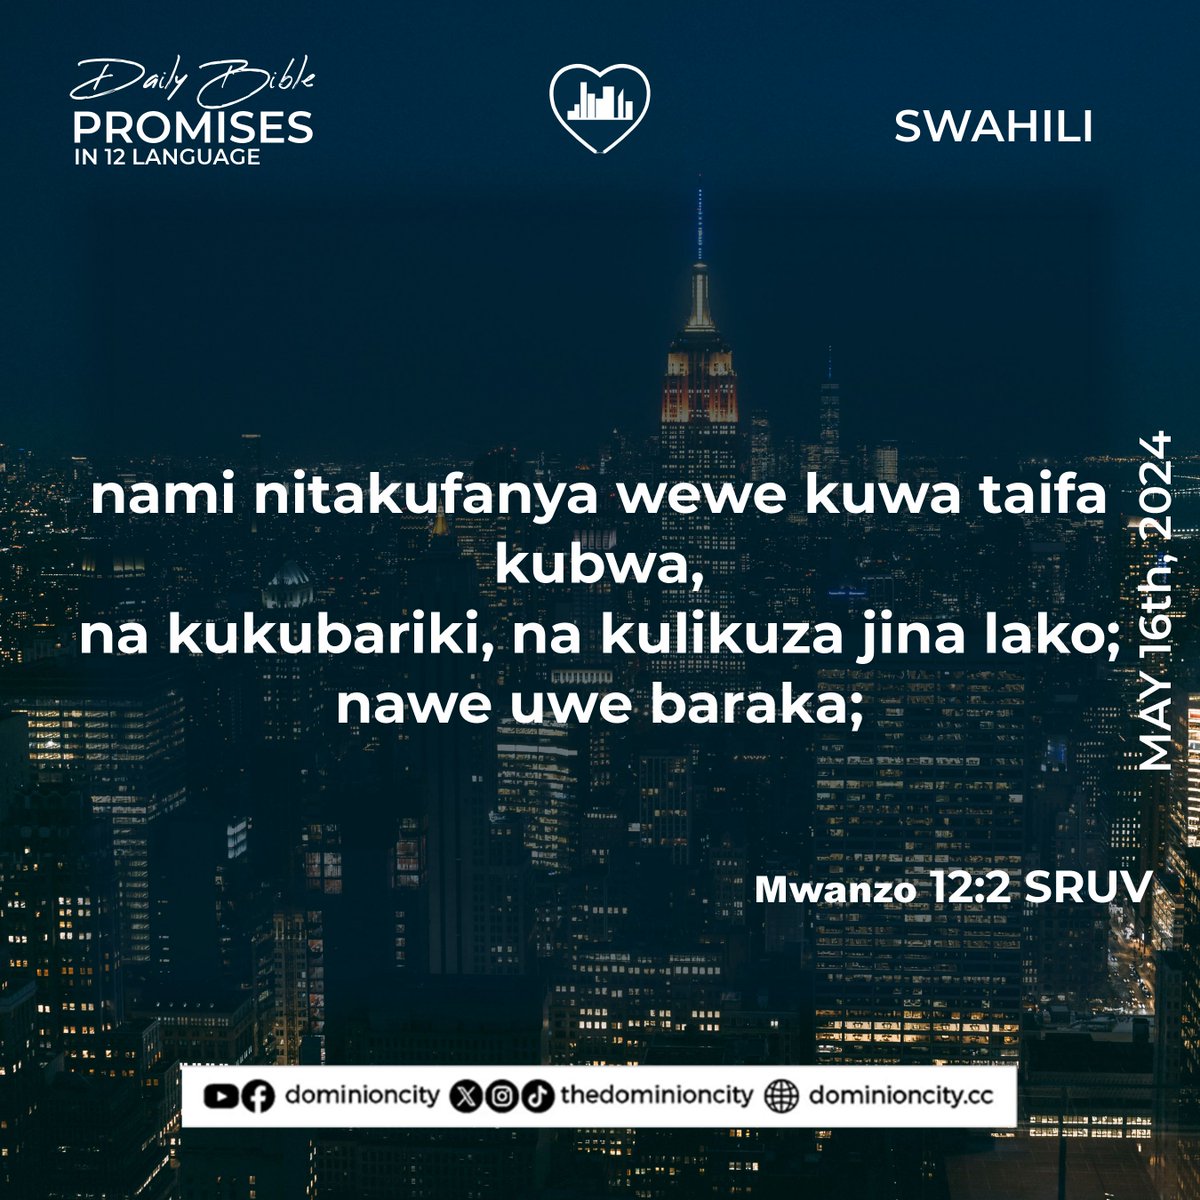 If you believe, type “AMEN”!

SET 2 of 3 | DAILY BIBLE PROMISES IN 12 LANGUAGES | MAY 16TH 2024 | LIKE, FOLLOW & SHARE

#Bible #GodsWord #trendingnow #Biblepromises #trendingreels #hope #love #faith #GoodNews #NewsUpdate